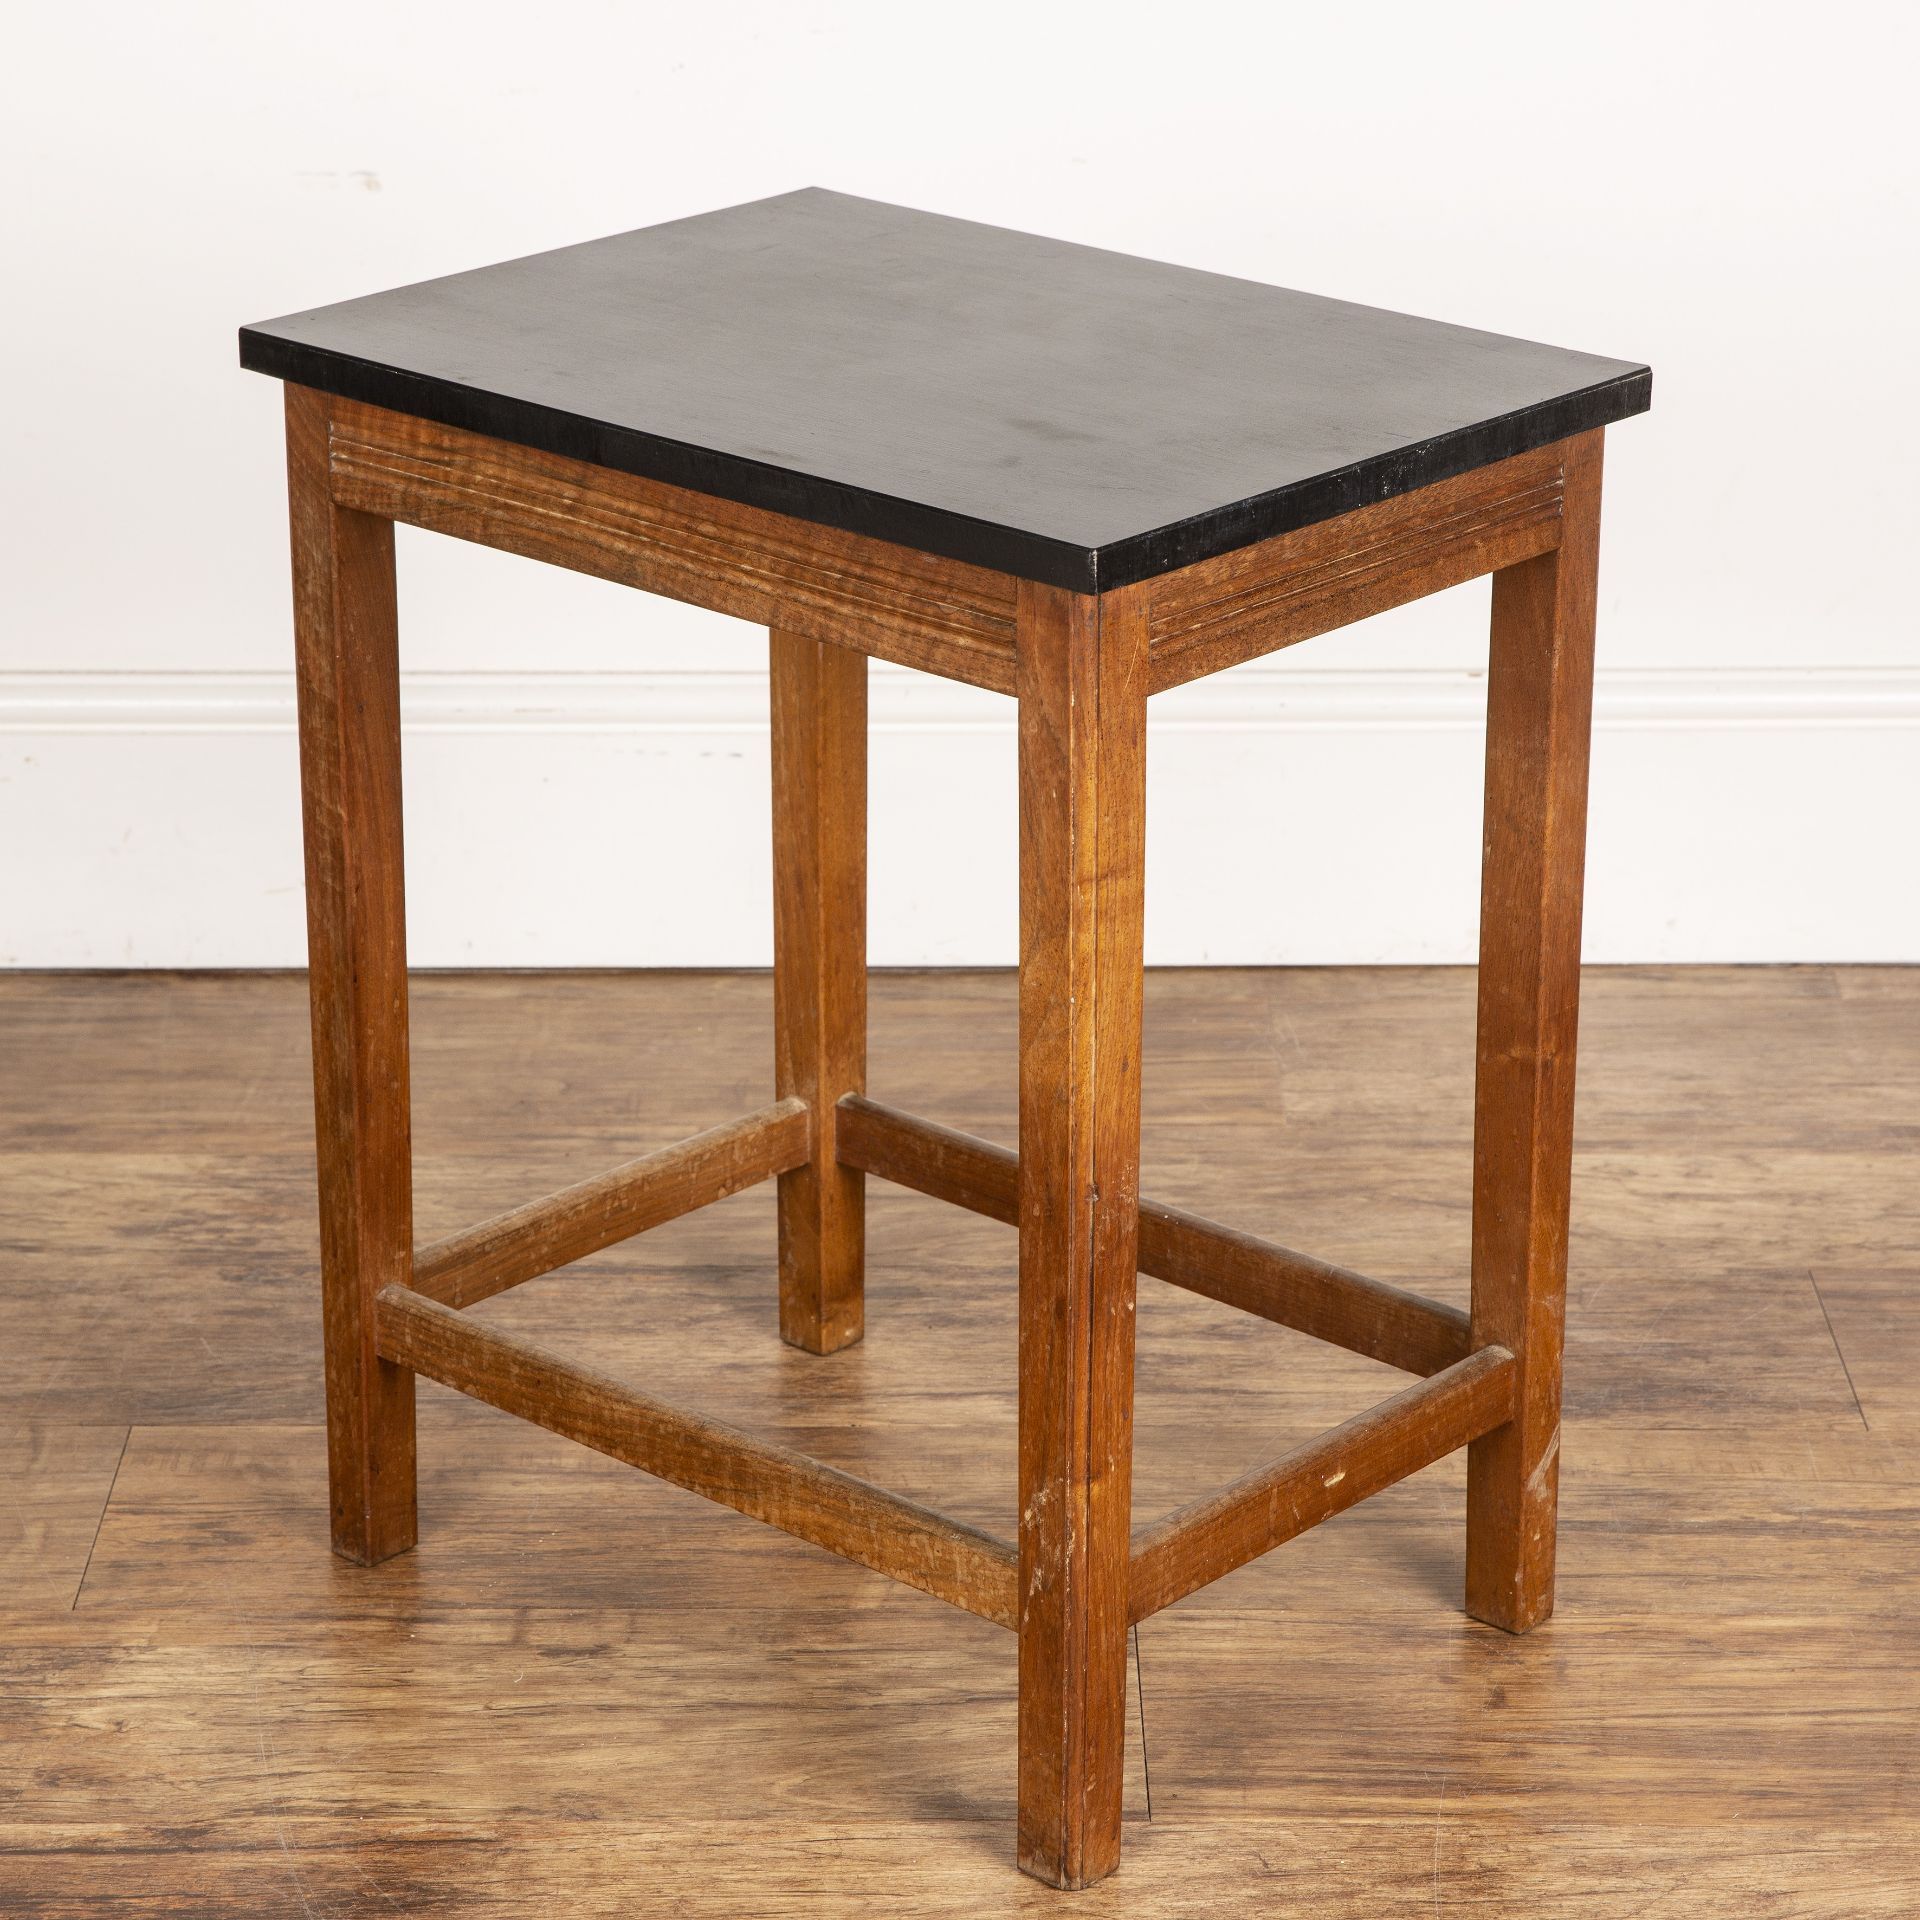 Gordon Russell (1892-1980) of Broadway oak framed table with black rectangular top, with copper - Image 3 of 6